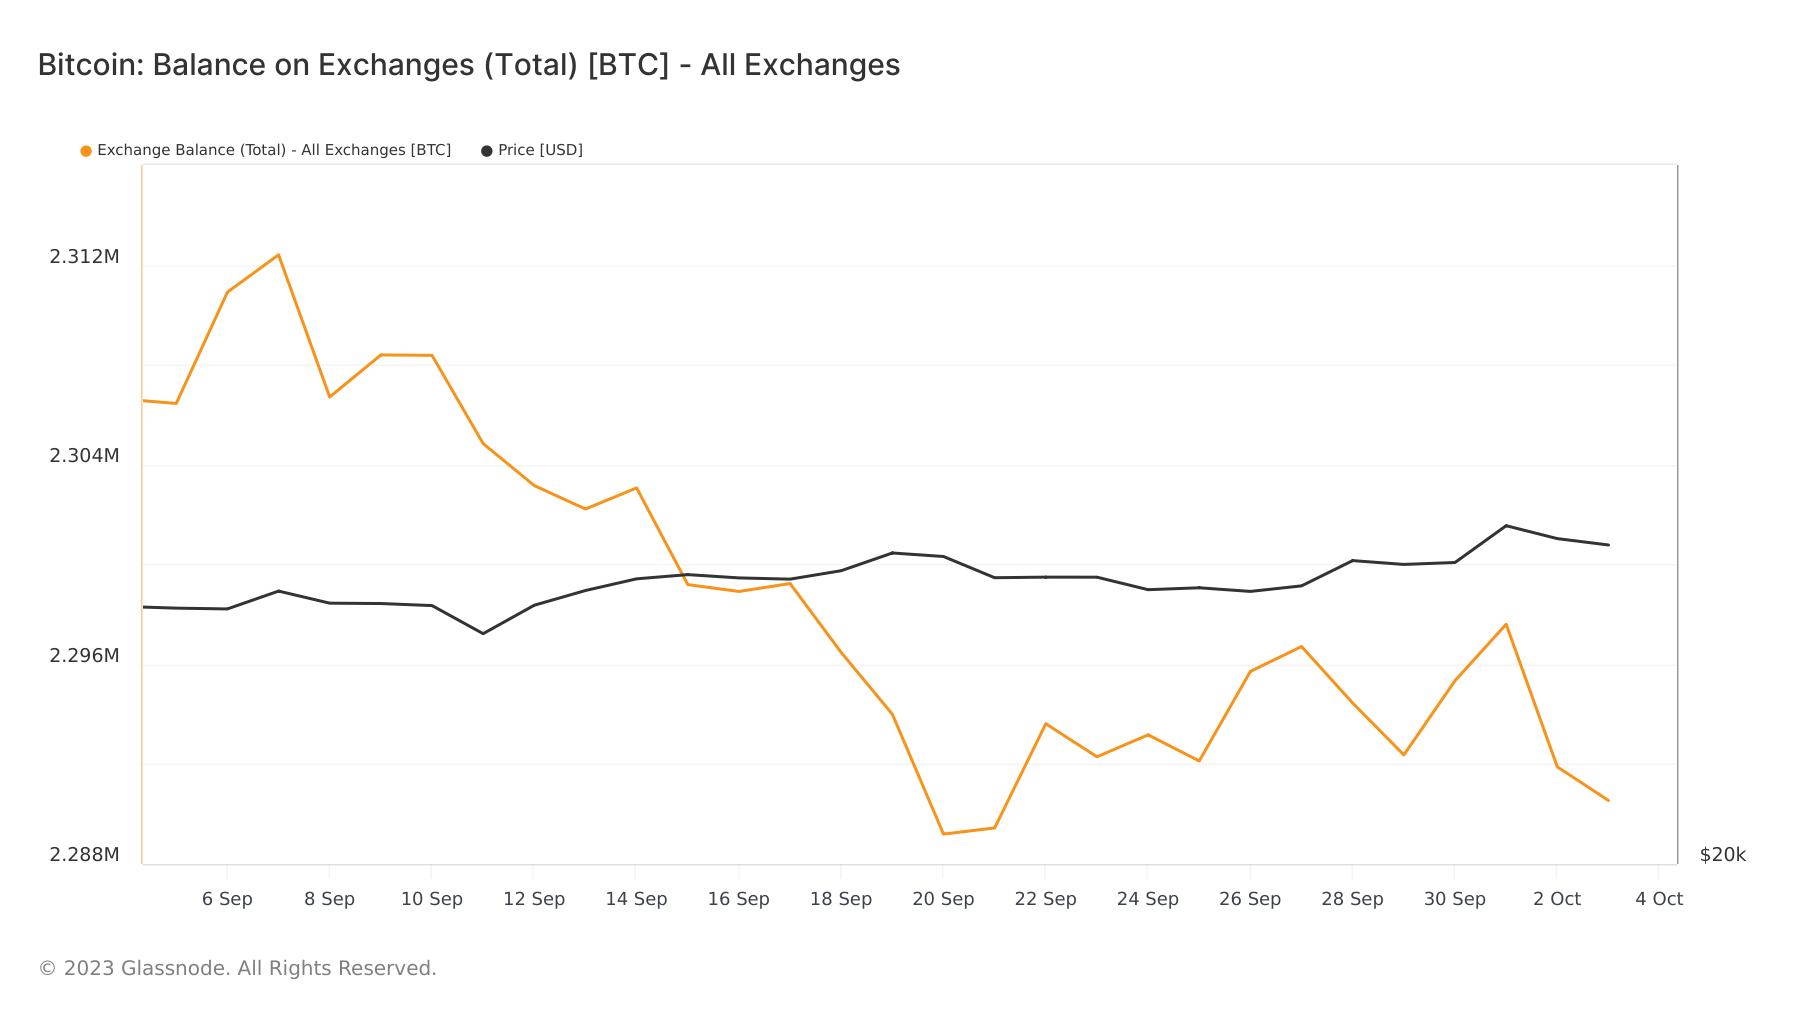 bitcoin total balance on exchanges